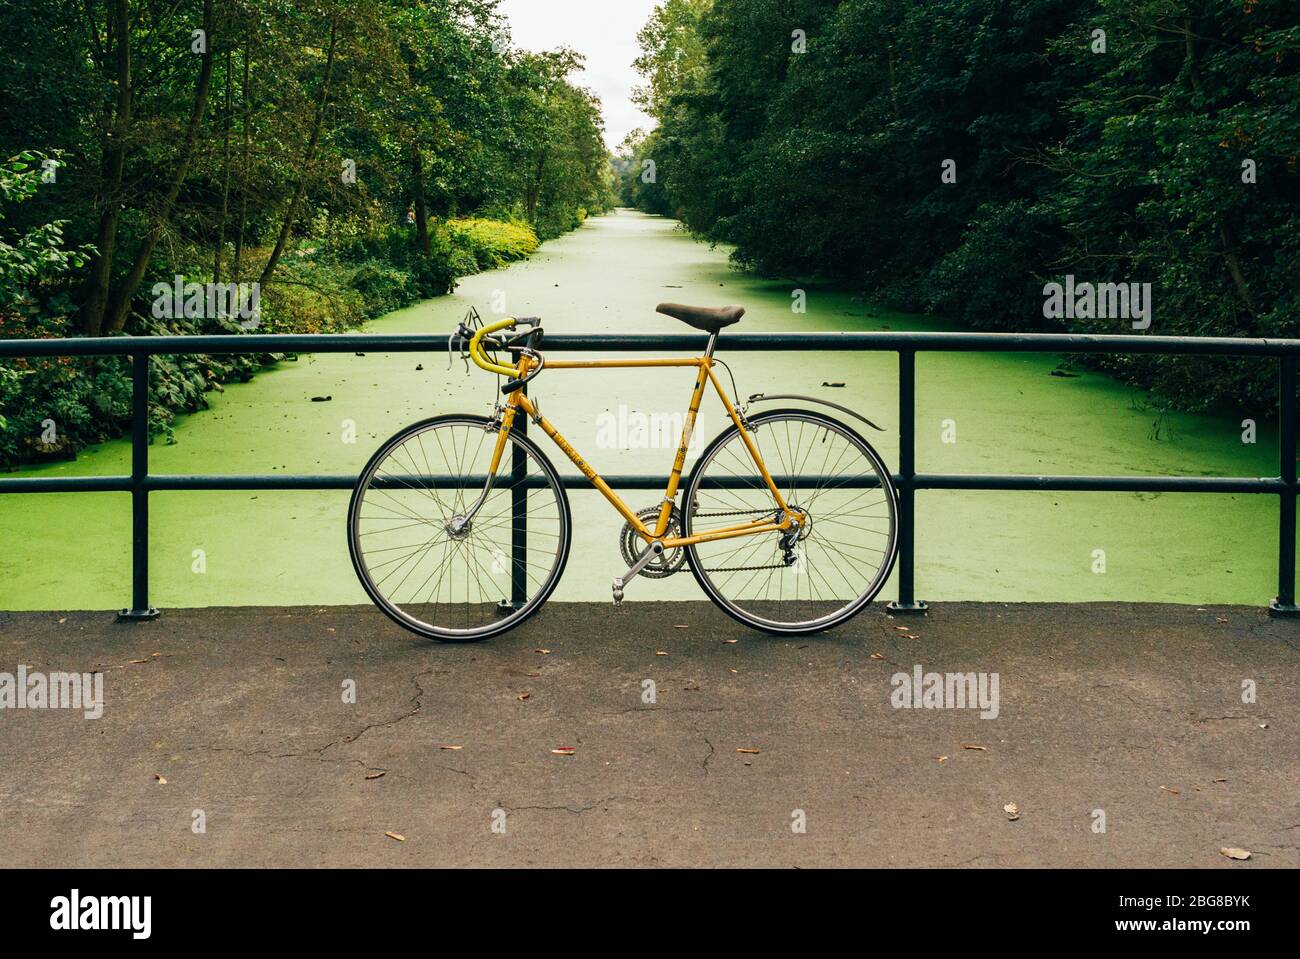 vintage yellow racing bike leaning on a bridge. green lined canal, trees, calm and peaceful background Stock Photo